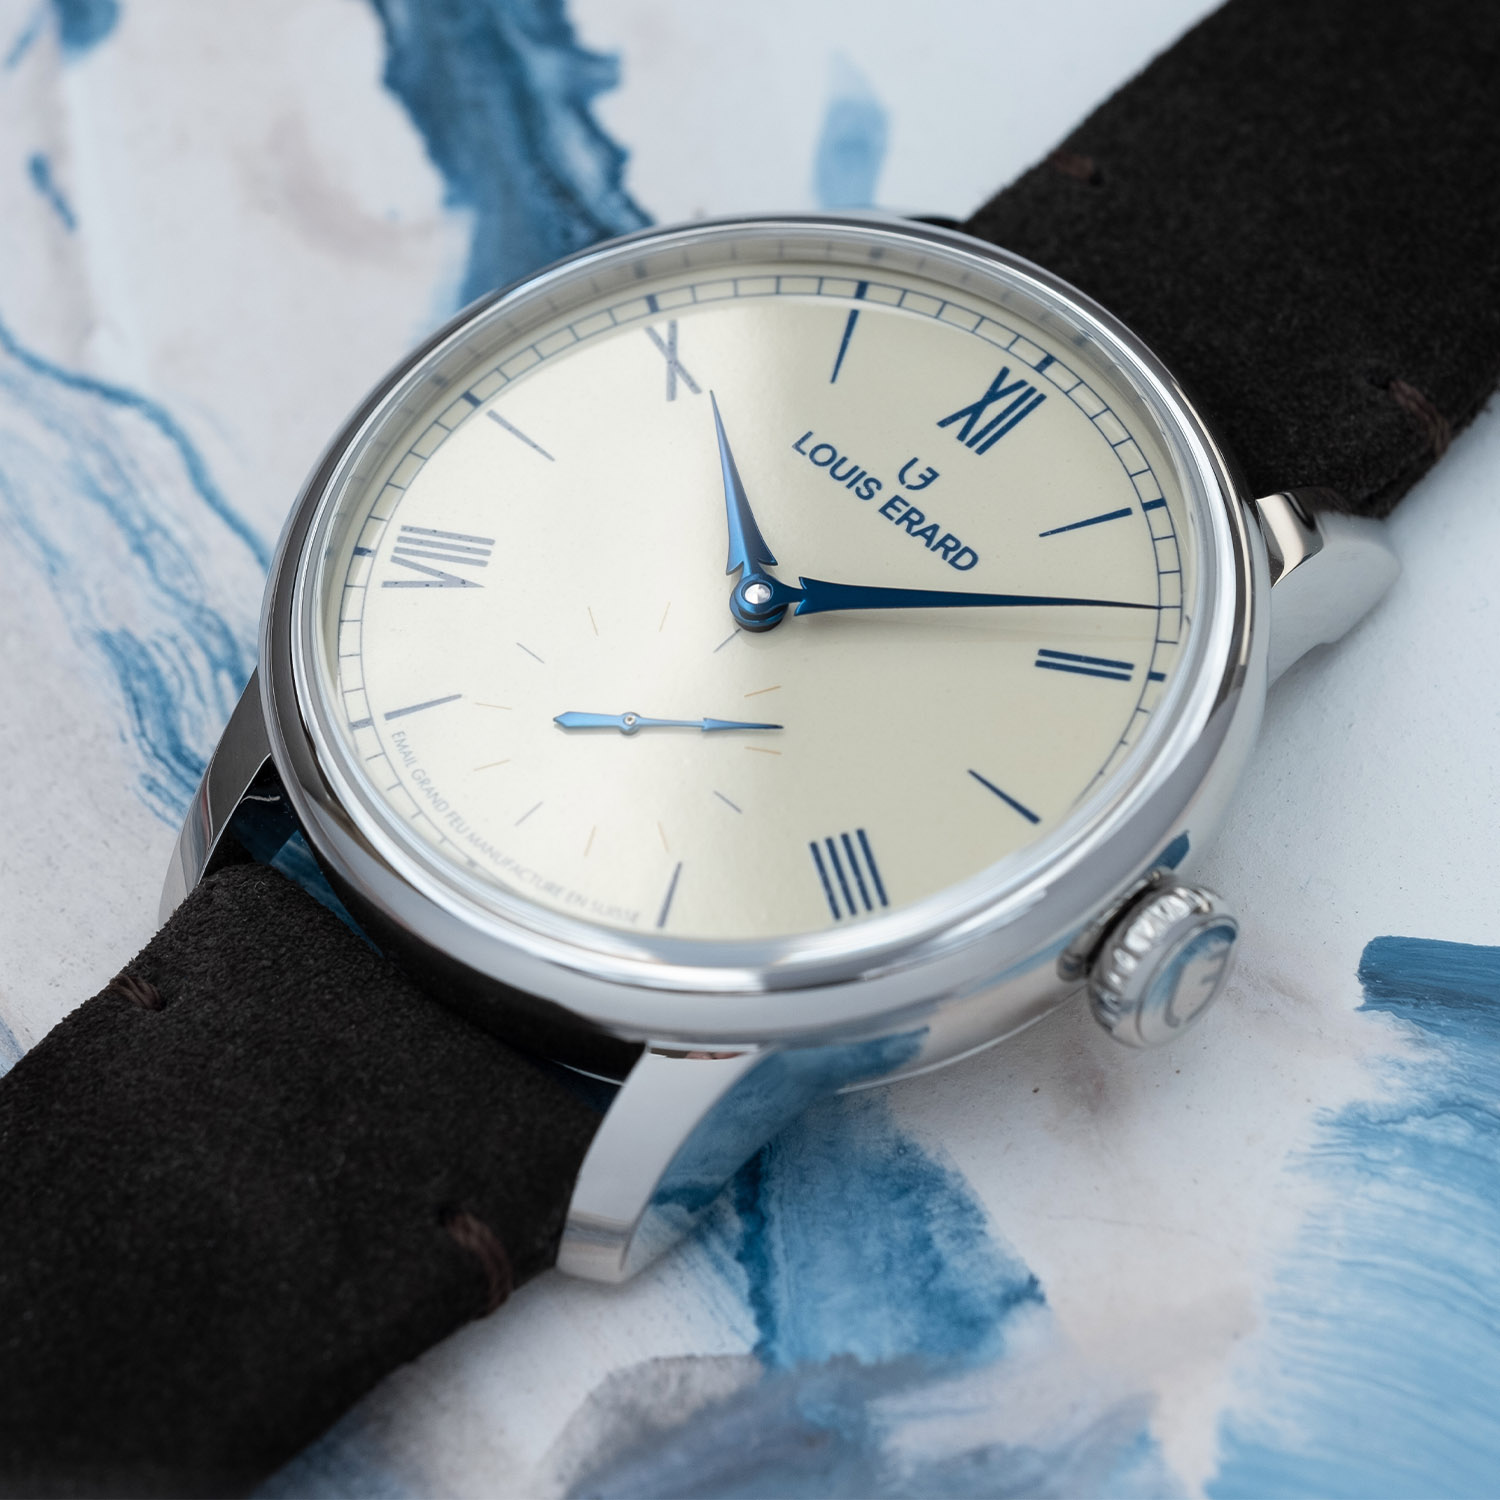 A Fortnight Review: Louis Erard Excellence Petite Seconde Watch